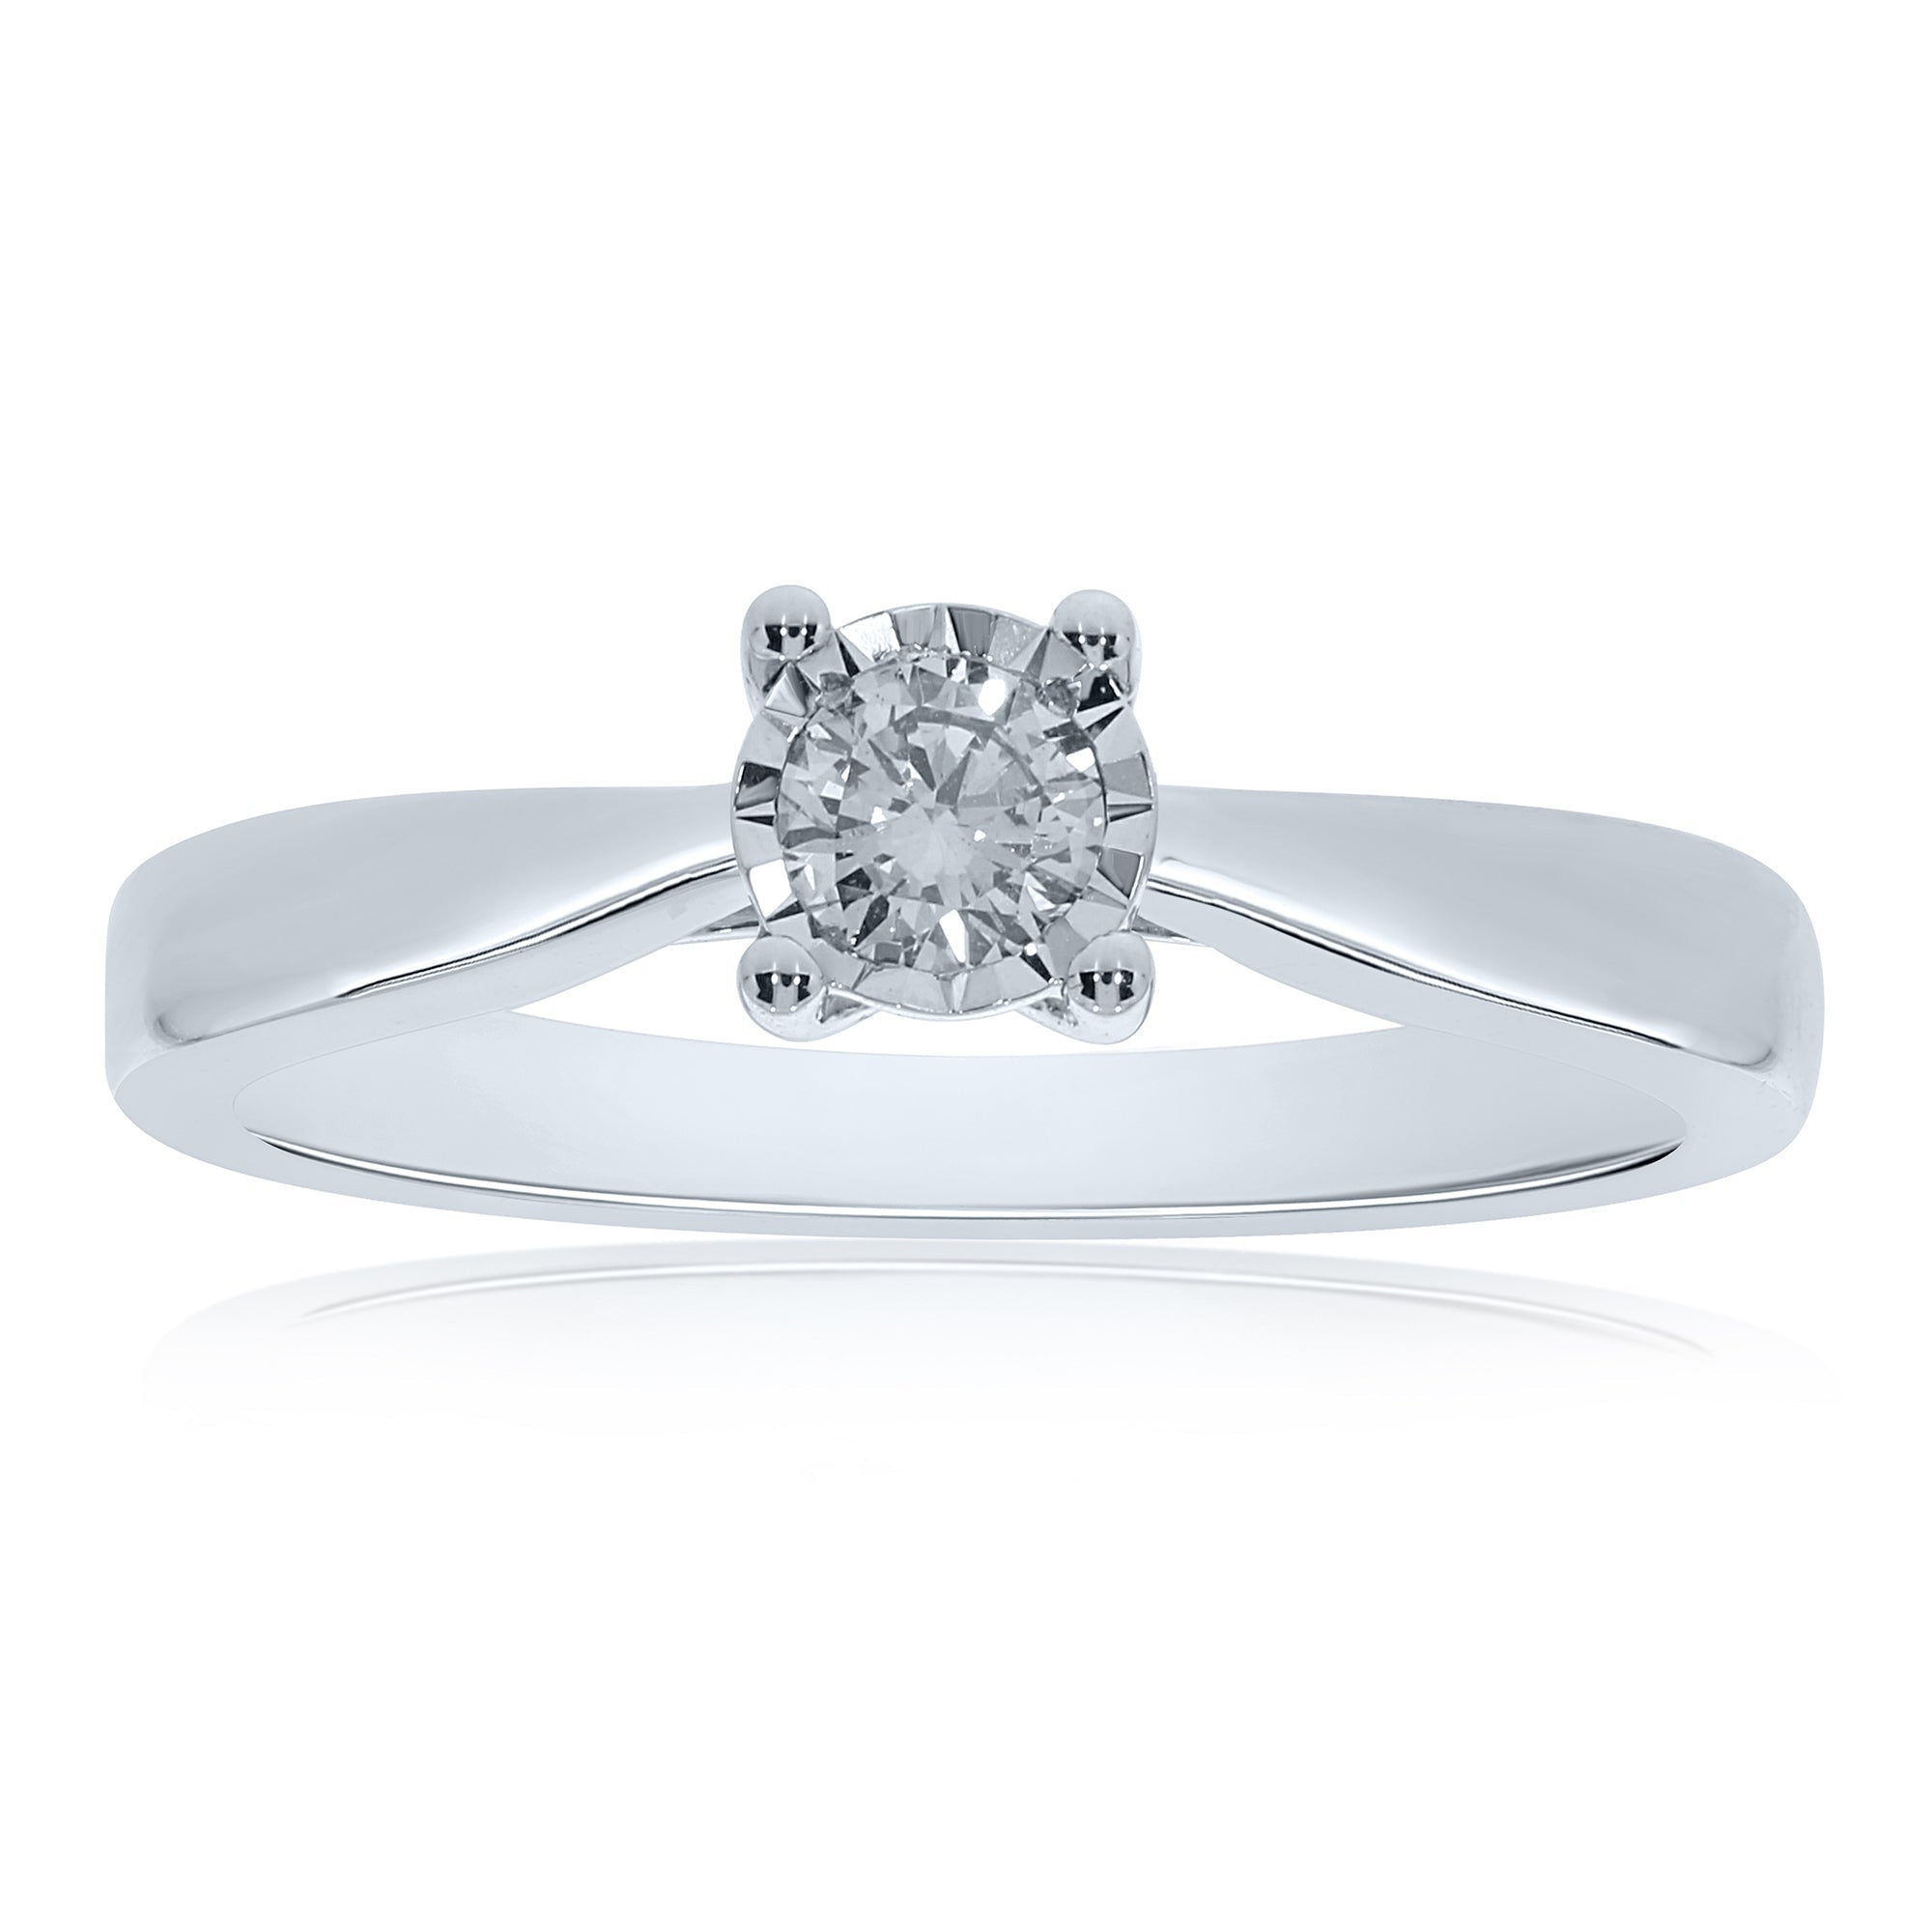 9ct white gold single stone miracle plate diamond ring 0.25ct